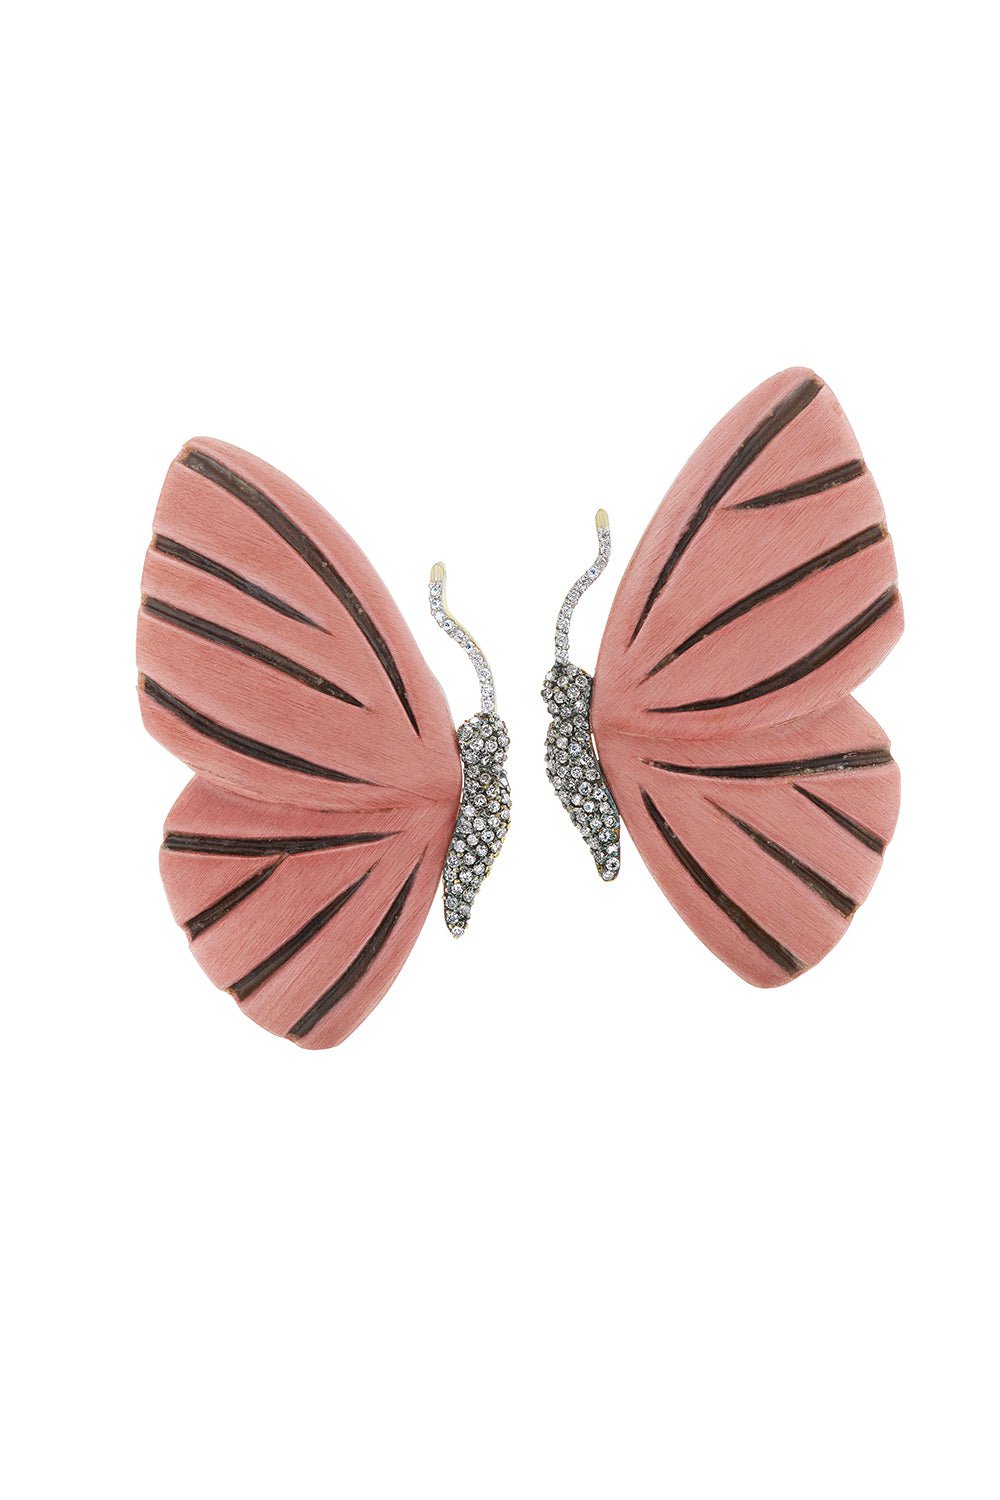 SILVIA FURMANOVICH-Botanical Marquetry Pink Butterfly Earrings-YELLOW GOLD